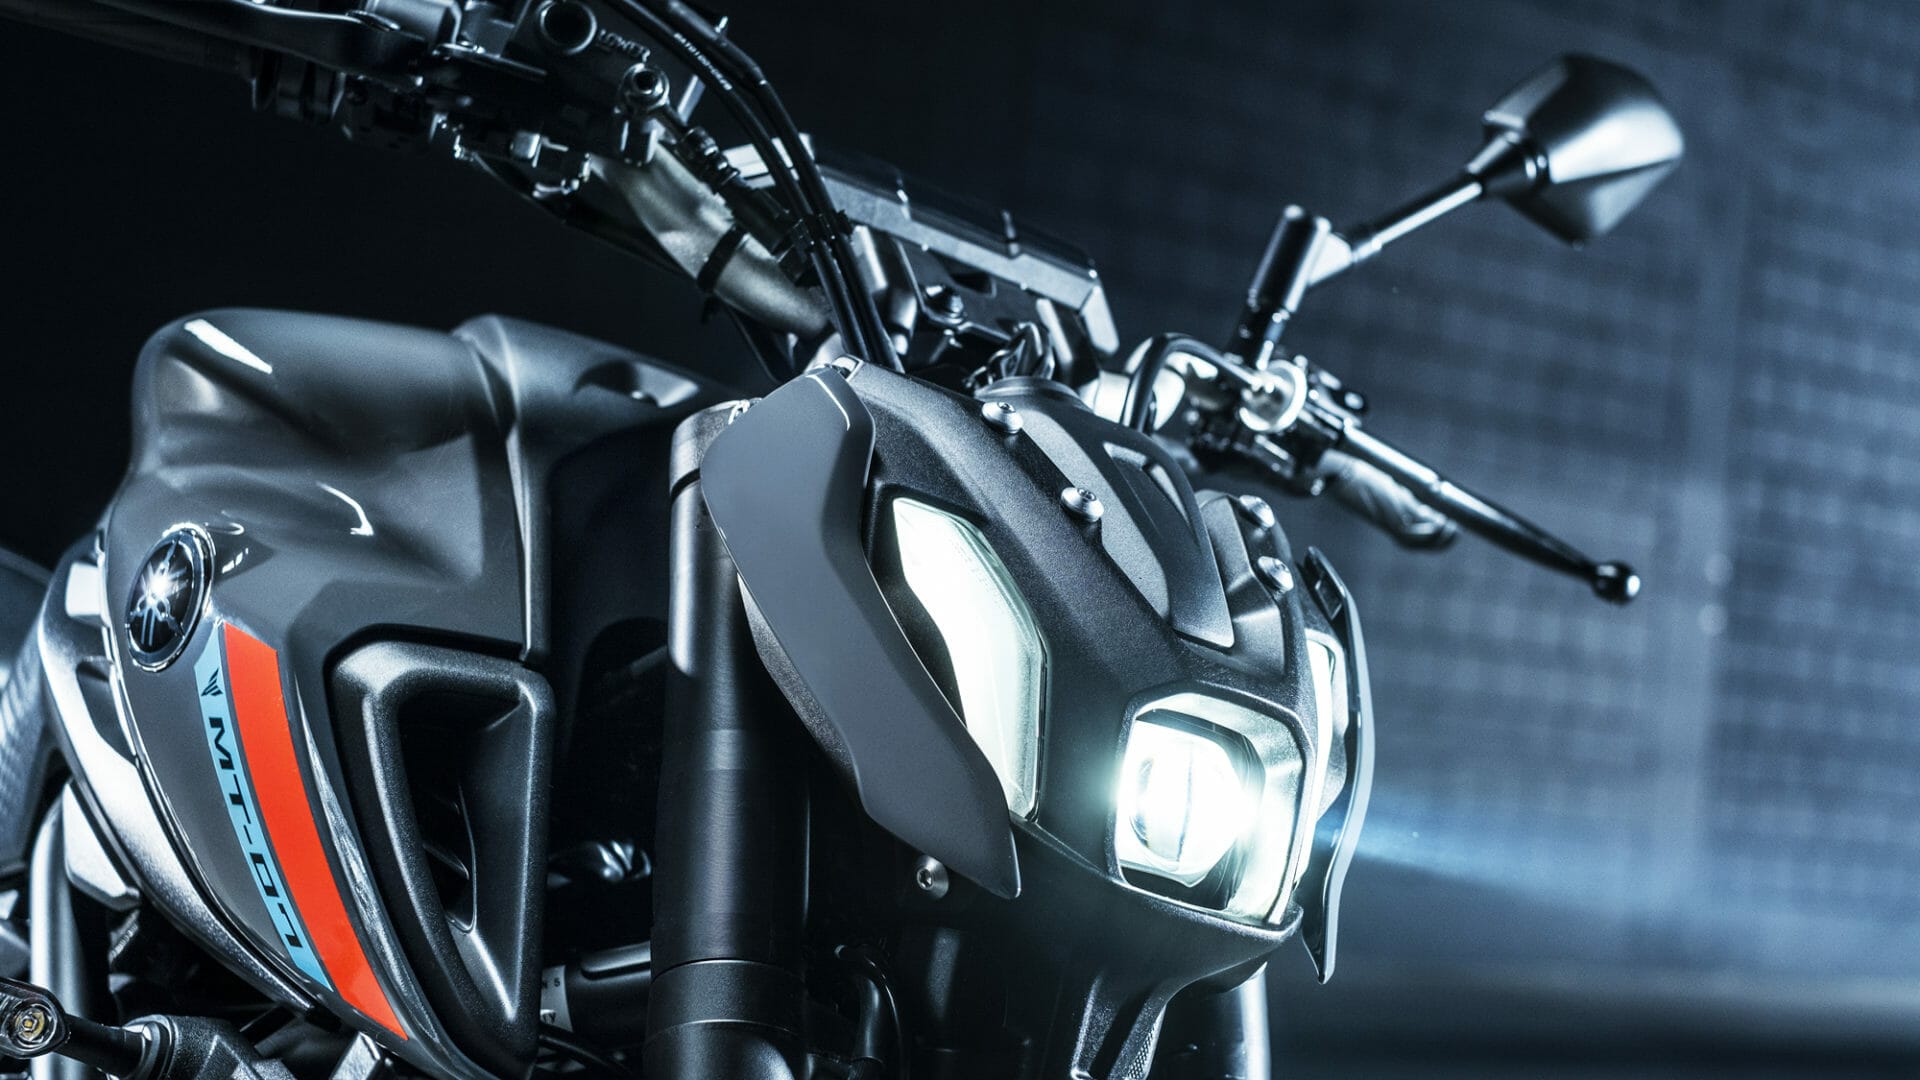 New Yamaha MT-07 (2021) presented
- also in the App MOTORCYCLE NEWS